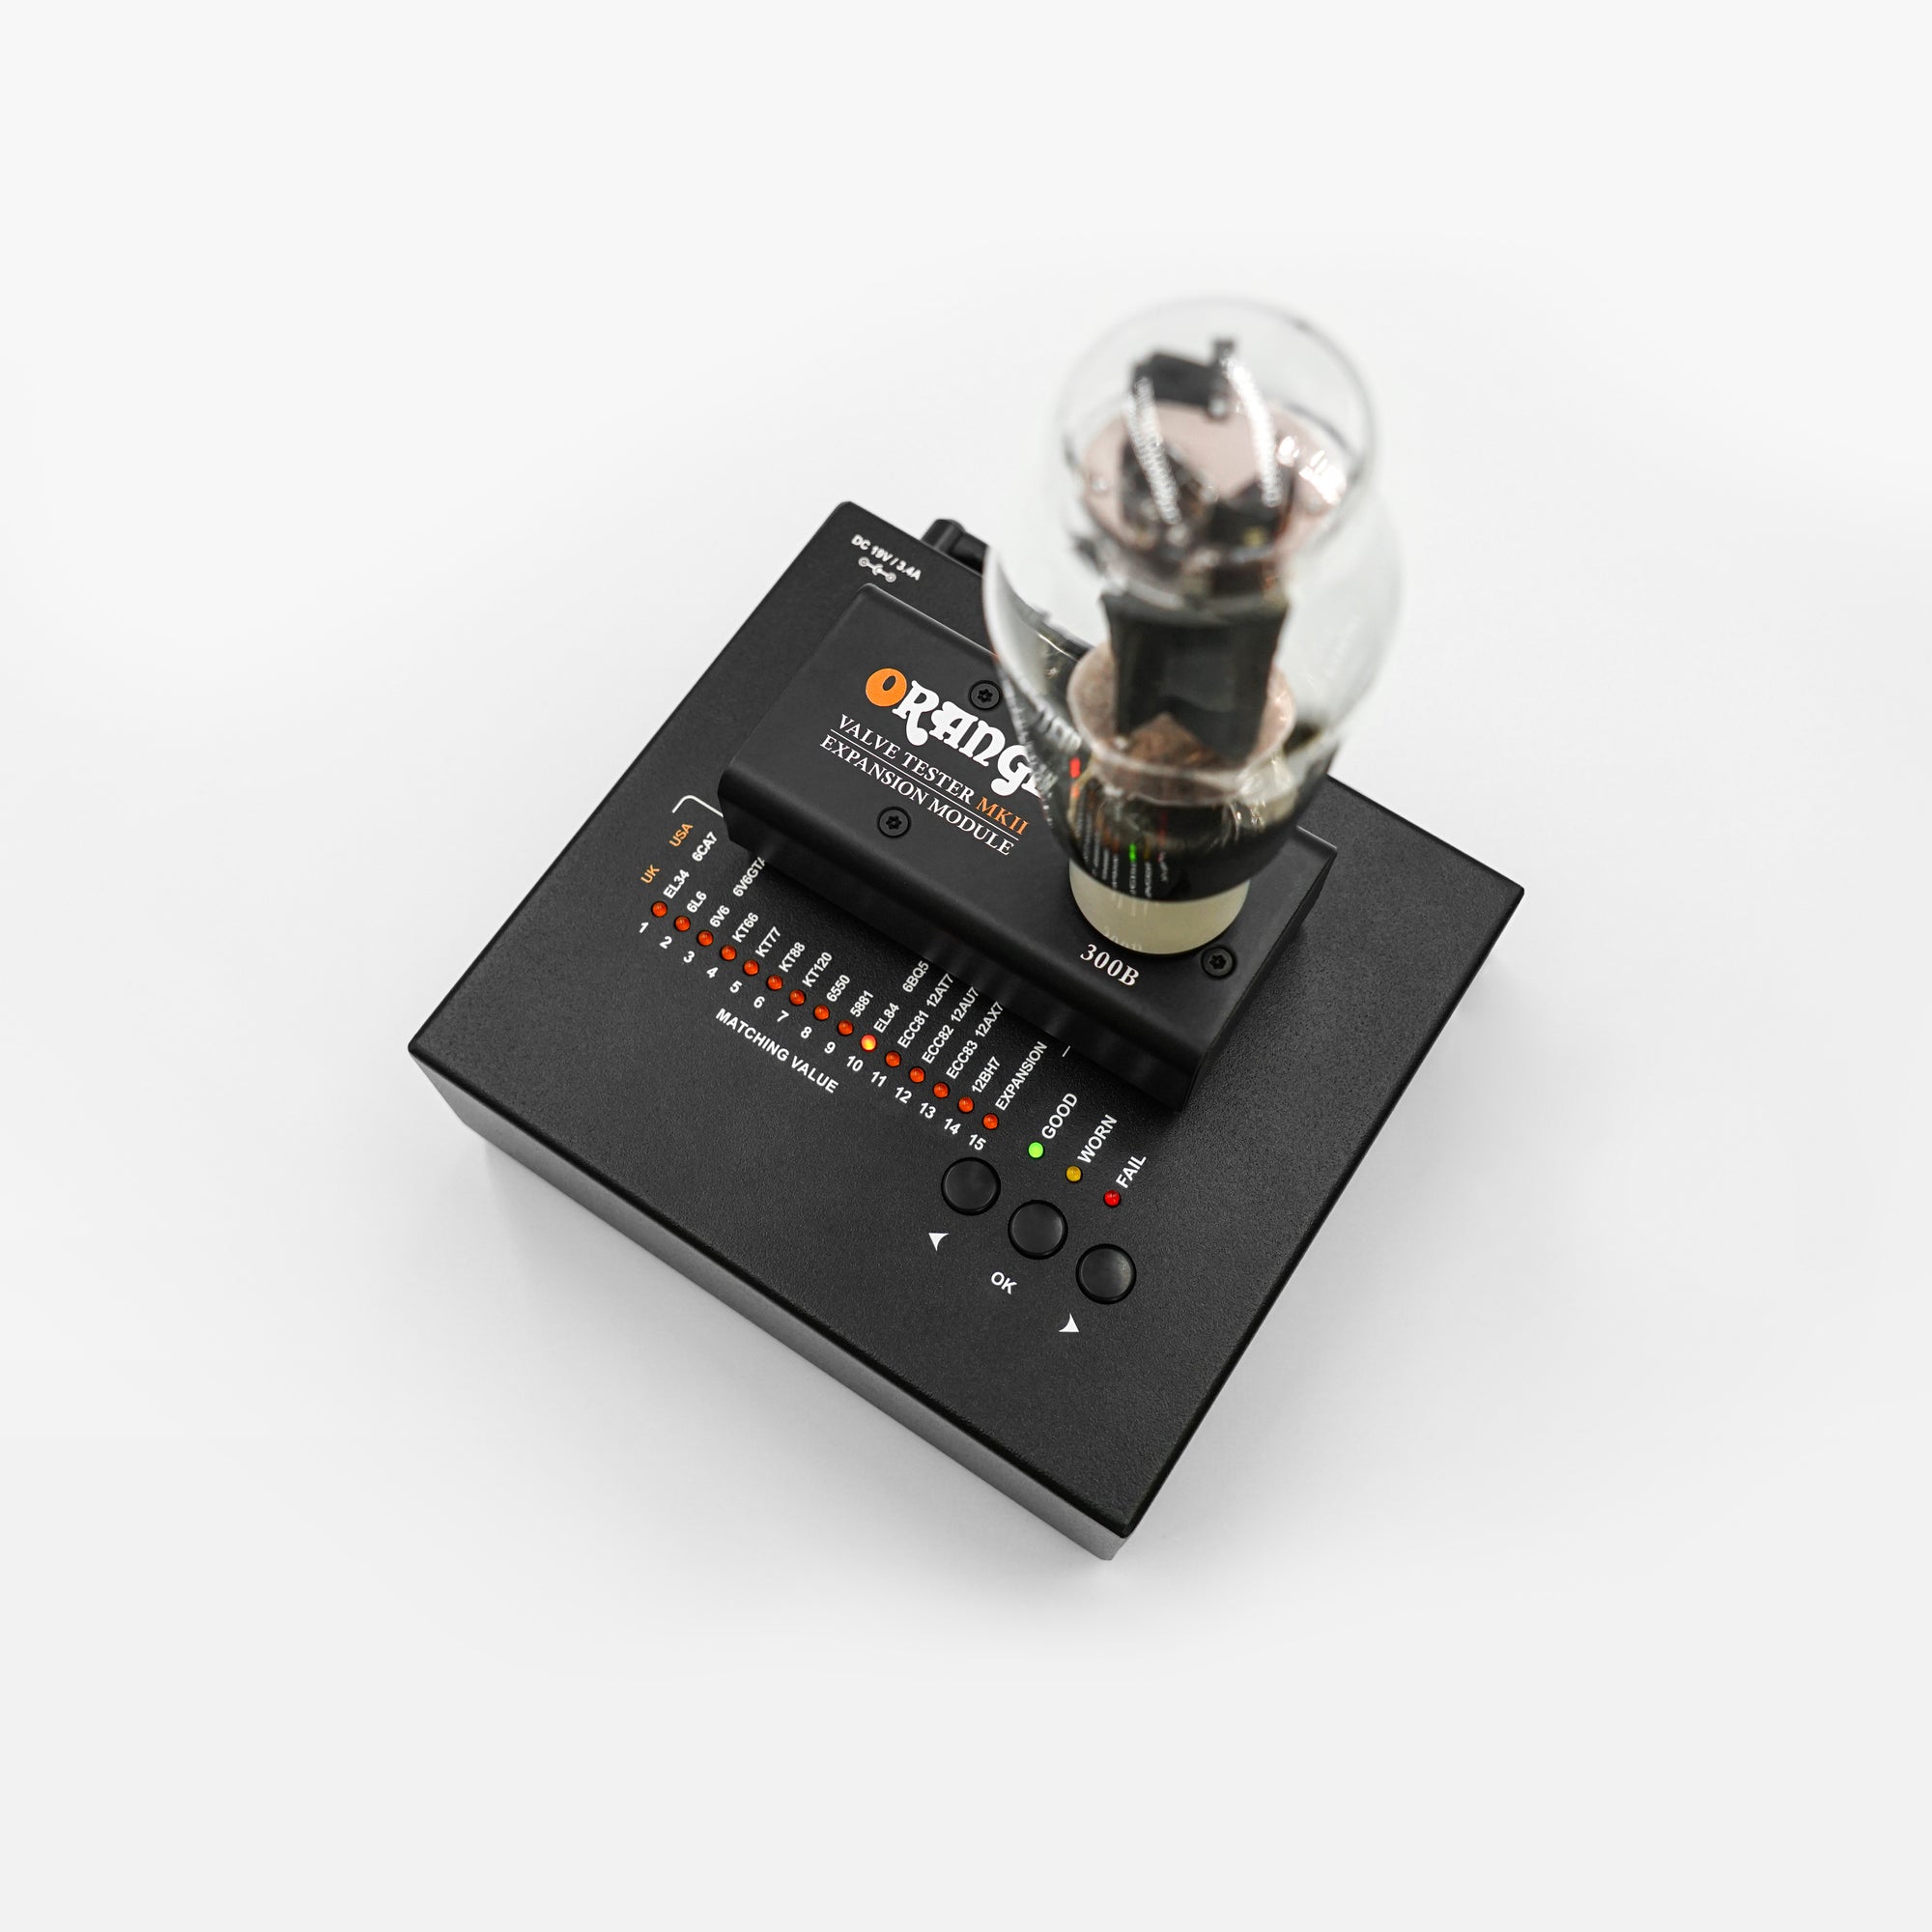 Plug-in expansion module for the Valve Tester MKII